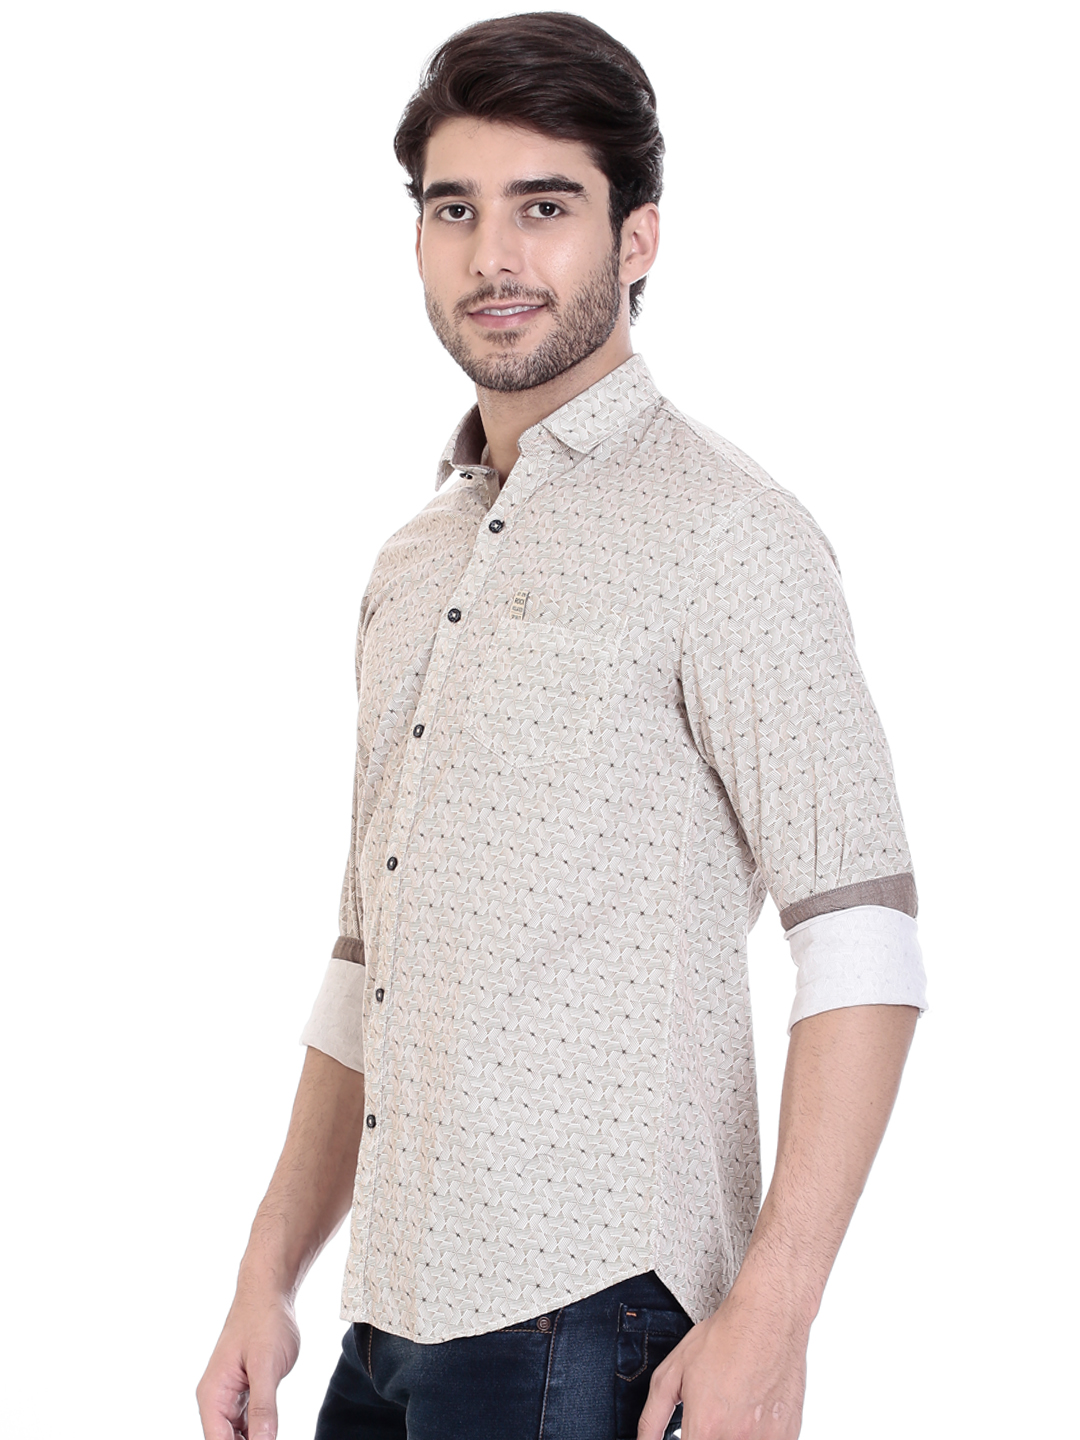 D Khakhi White Colour Printed Shirts With Contrast Button With Spread ...